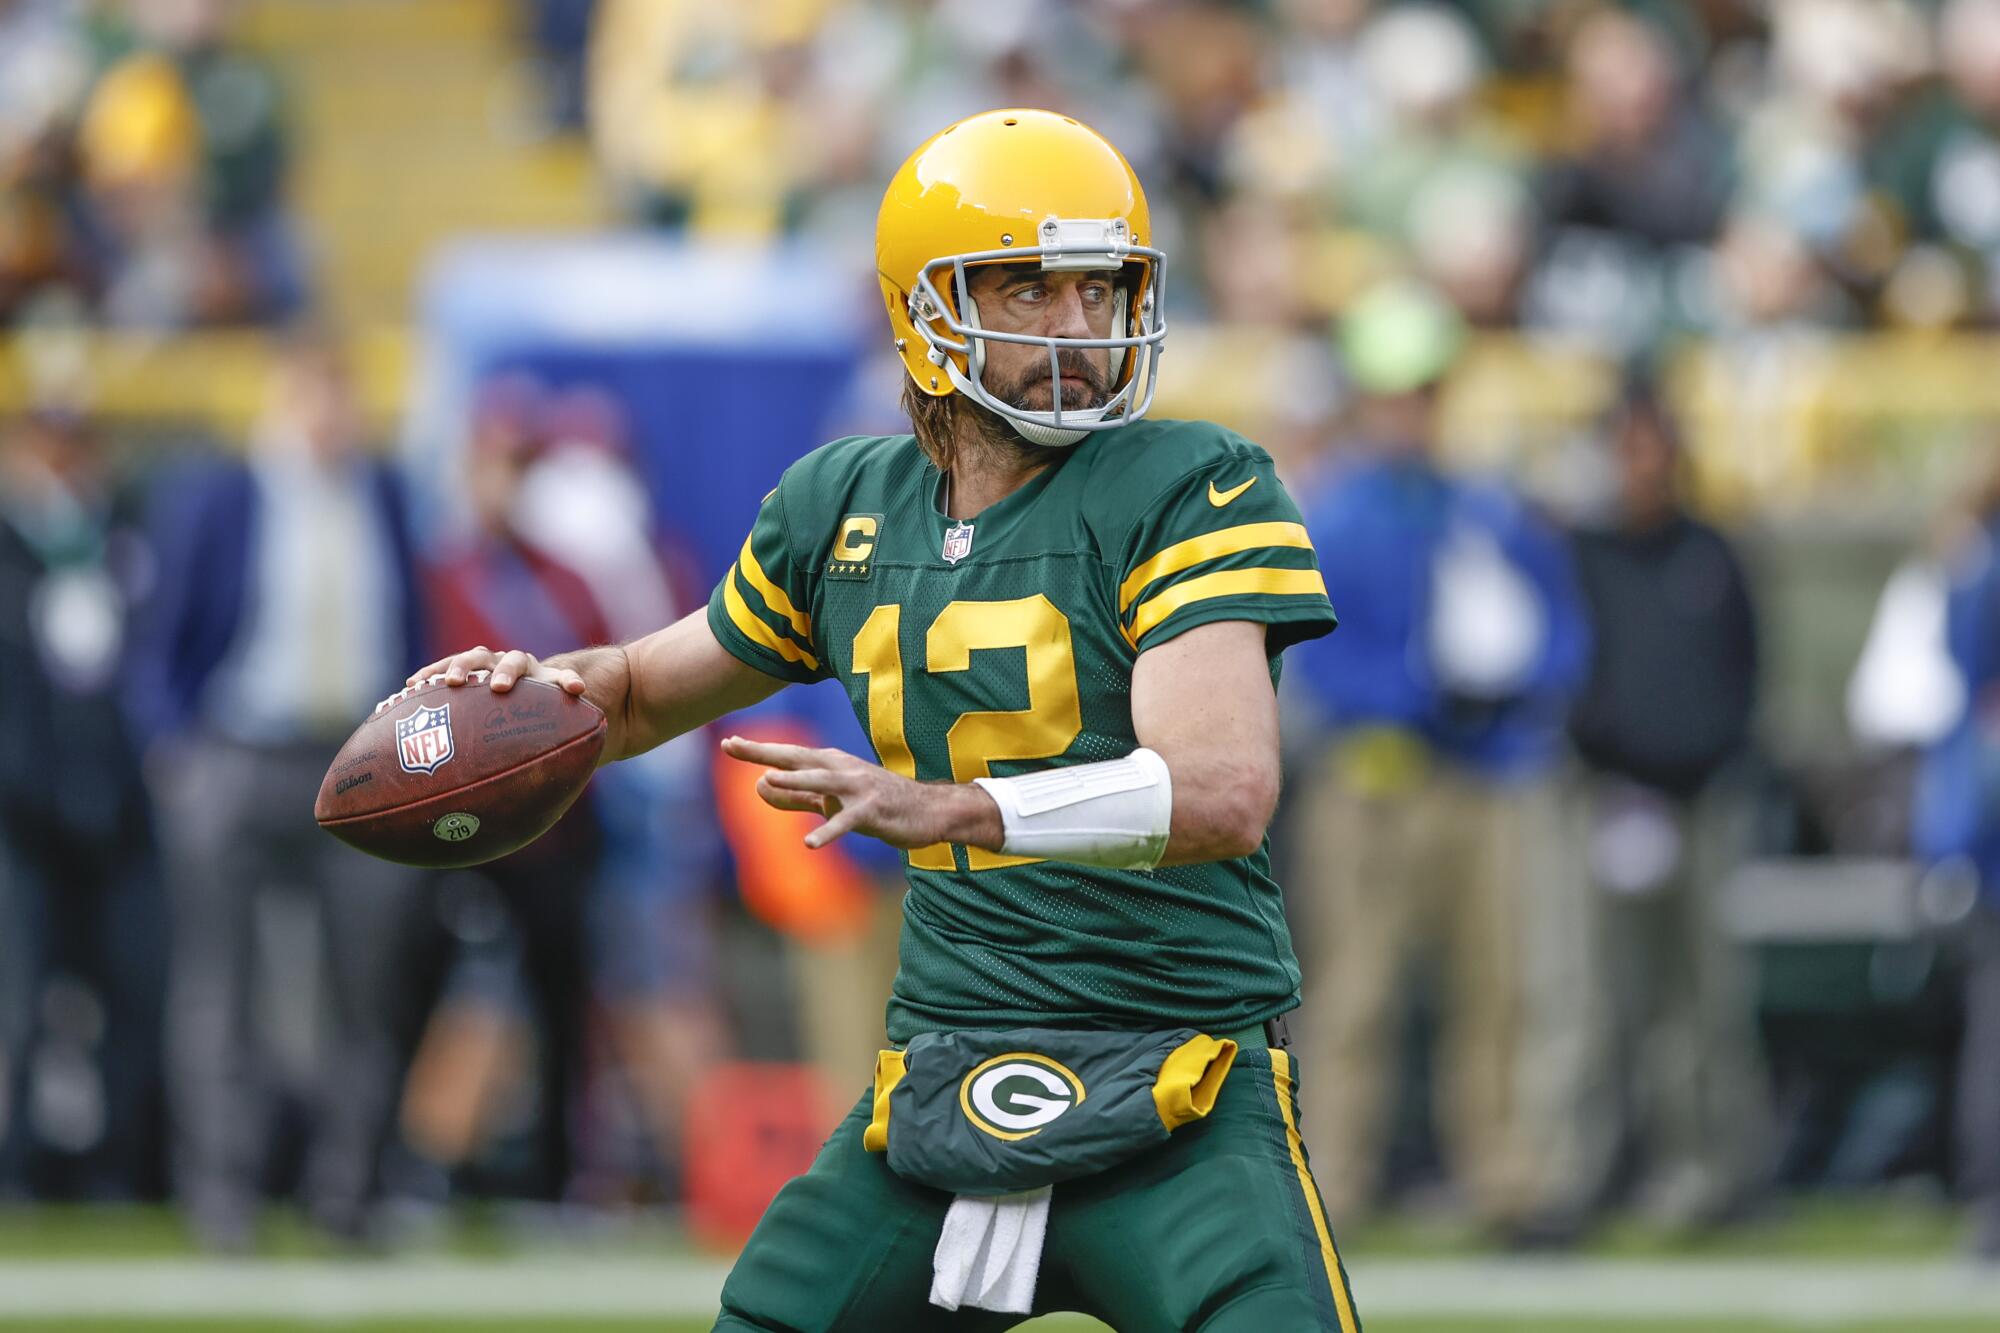 Green Bay Packers quarterback Aaron Rodgers looks to pass the ball.